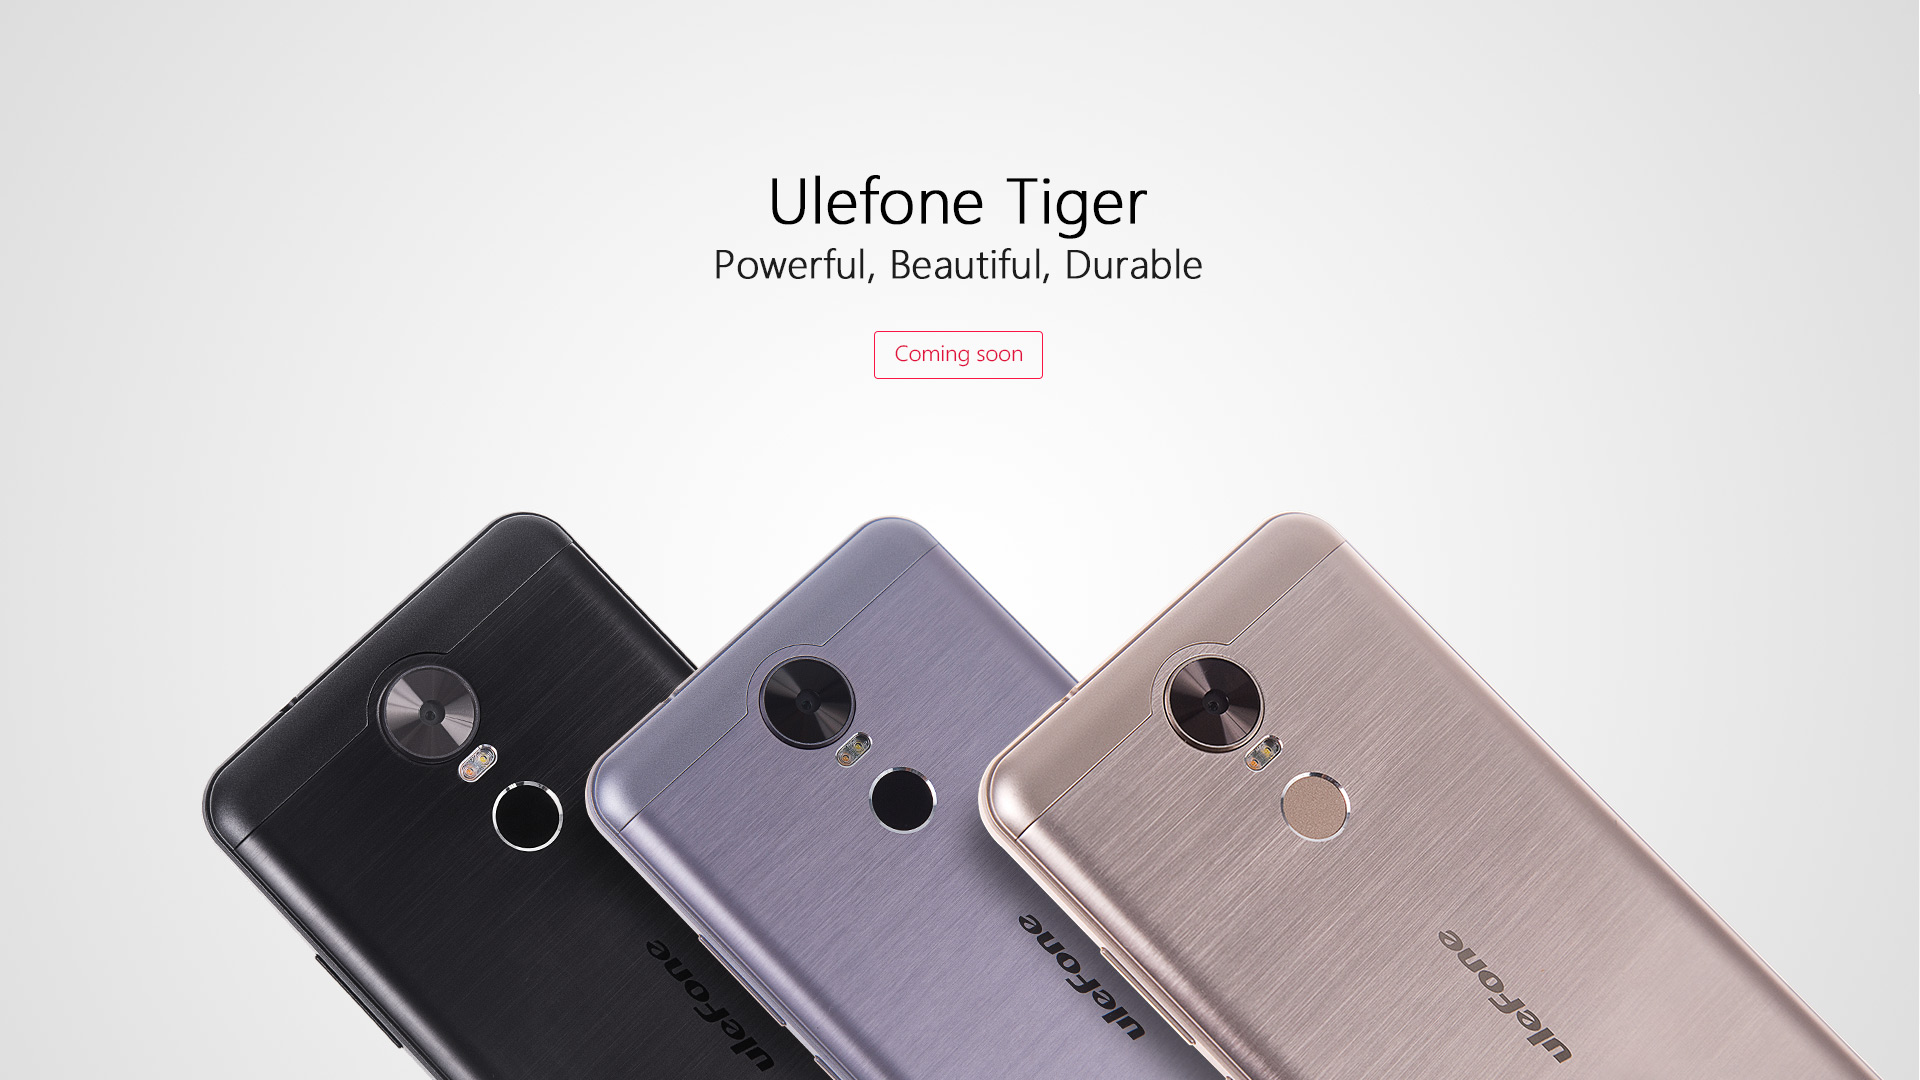 It's over 4000 (mAh)! That is, Ulefone Tiger's battery will be.